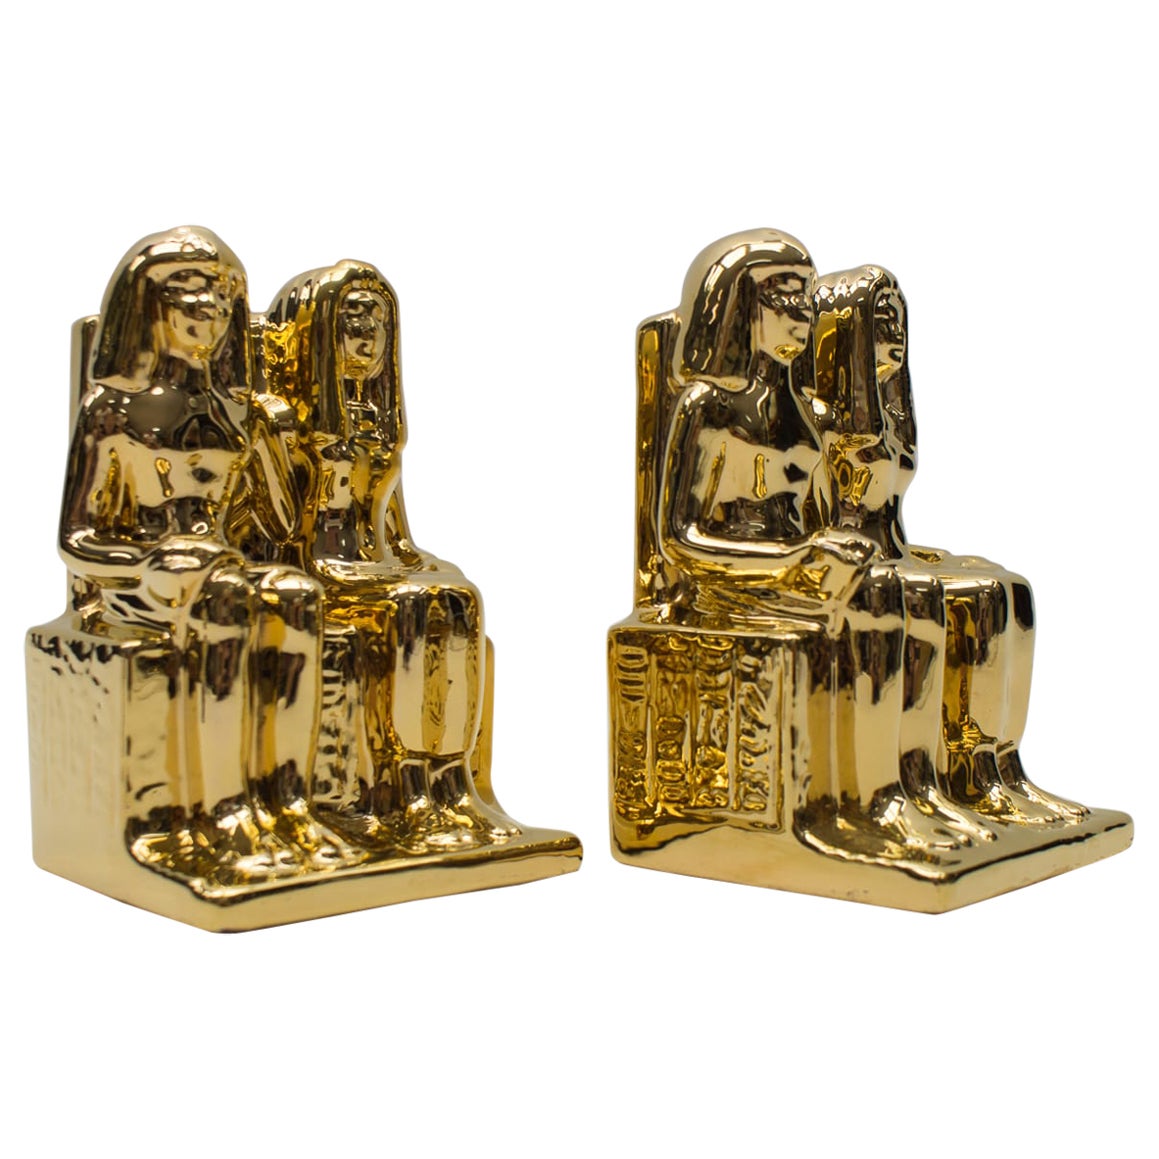 Pair of Egyptian Hollywood Regency Ceramic Bookends by Bellini, Italy 1970s